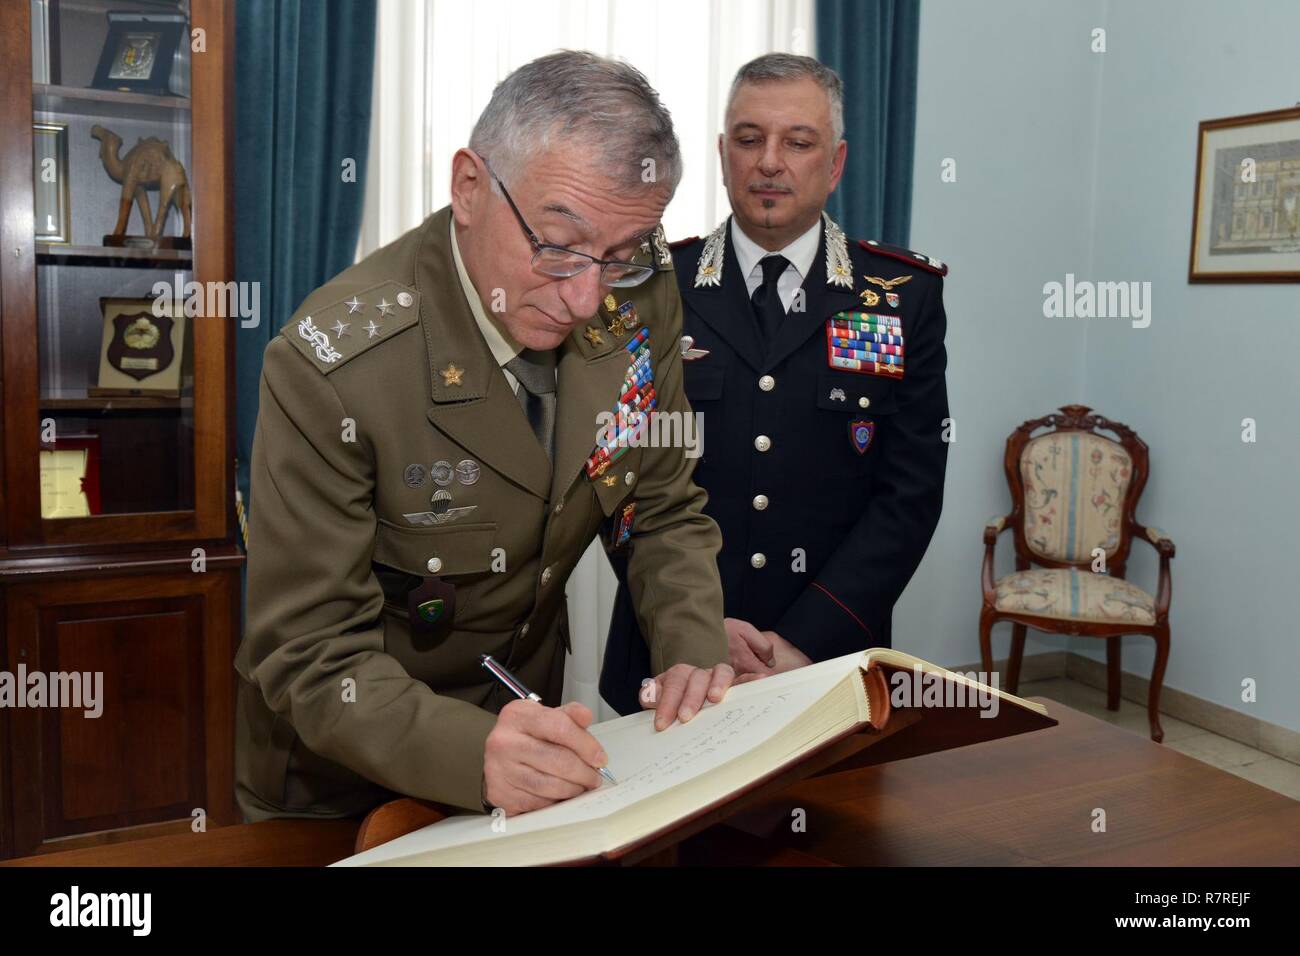 Gen. Claudio Graziano, Italian Army Chief of Staff, signs the guest of honor book, during visit at Center of Excellence for Stability Police Units (CoESPU) Vicenza, Italy, April 1, 2017. Stock Photo